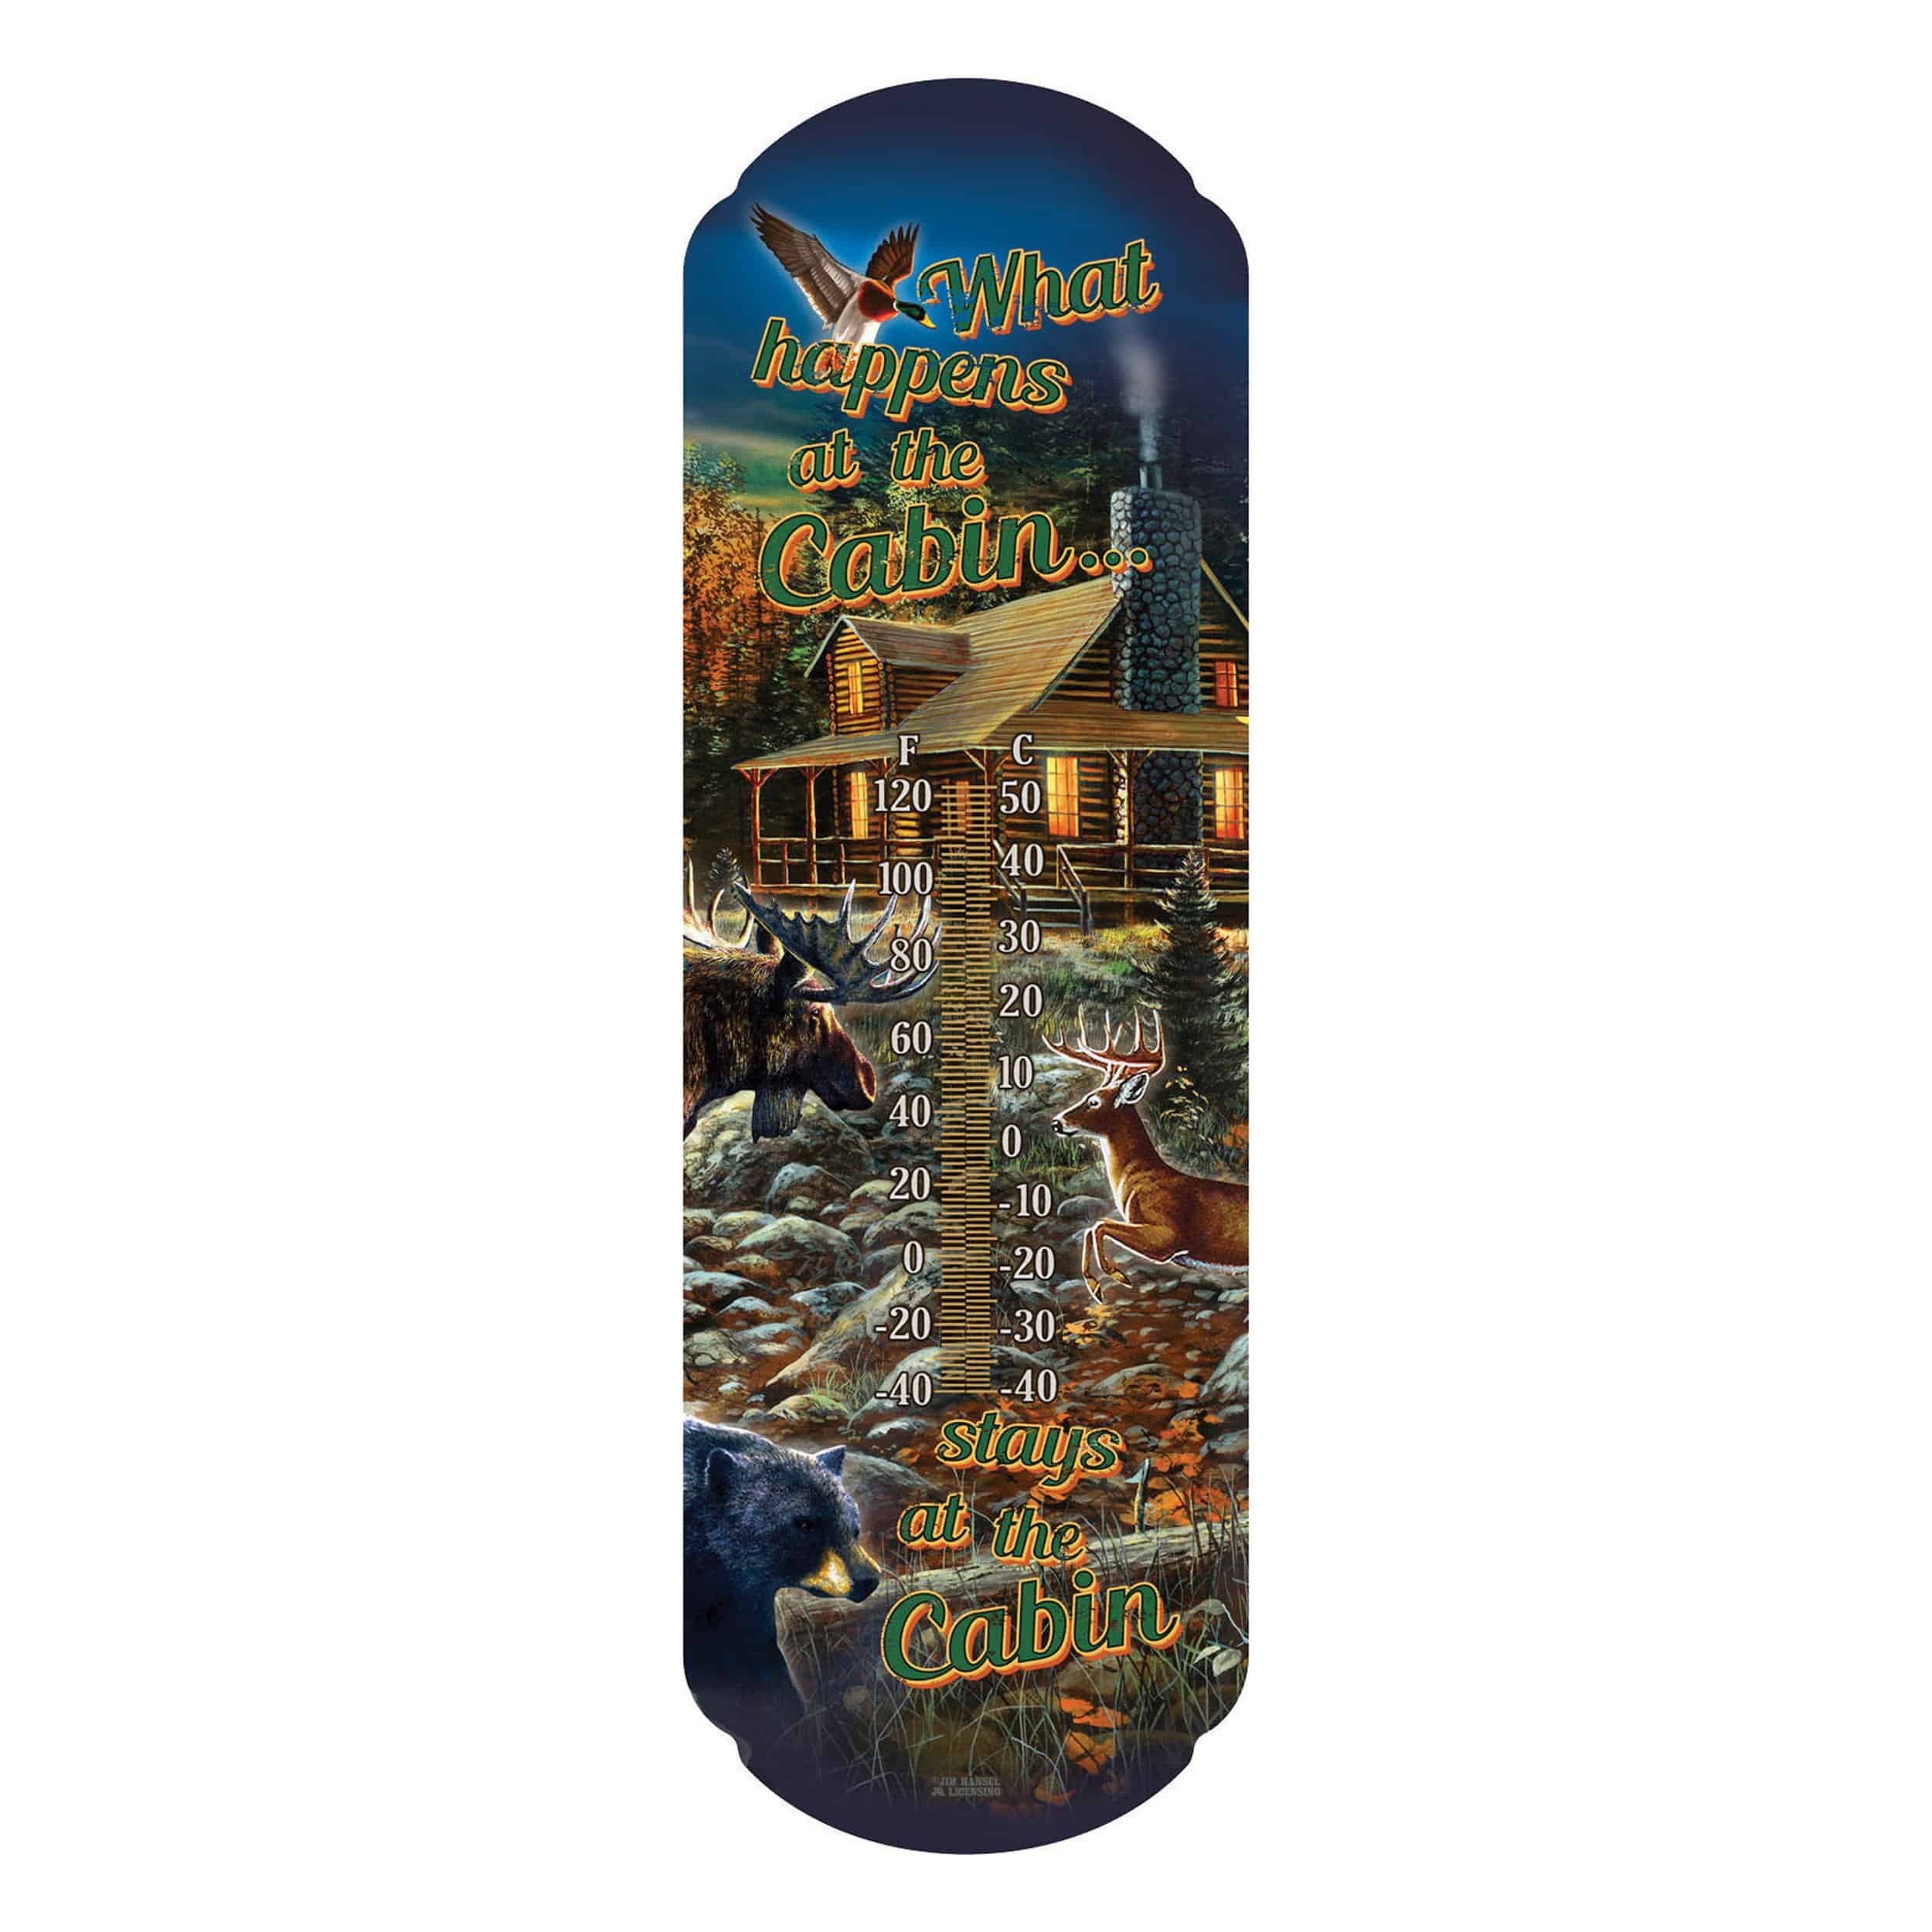 Tin Thermometer – Stays at the Cabin